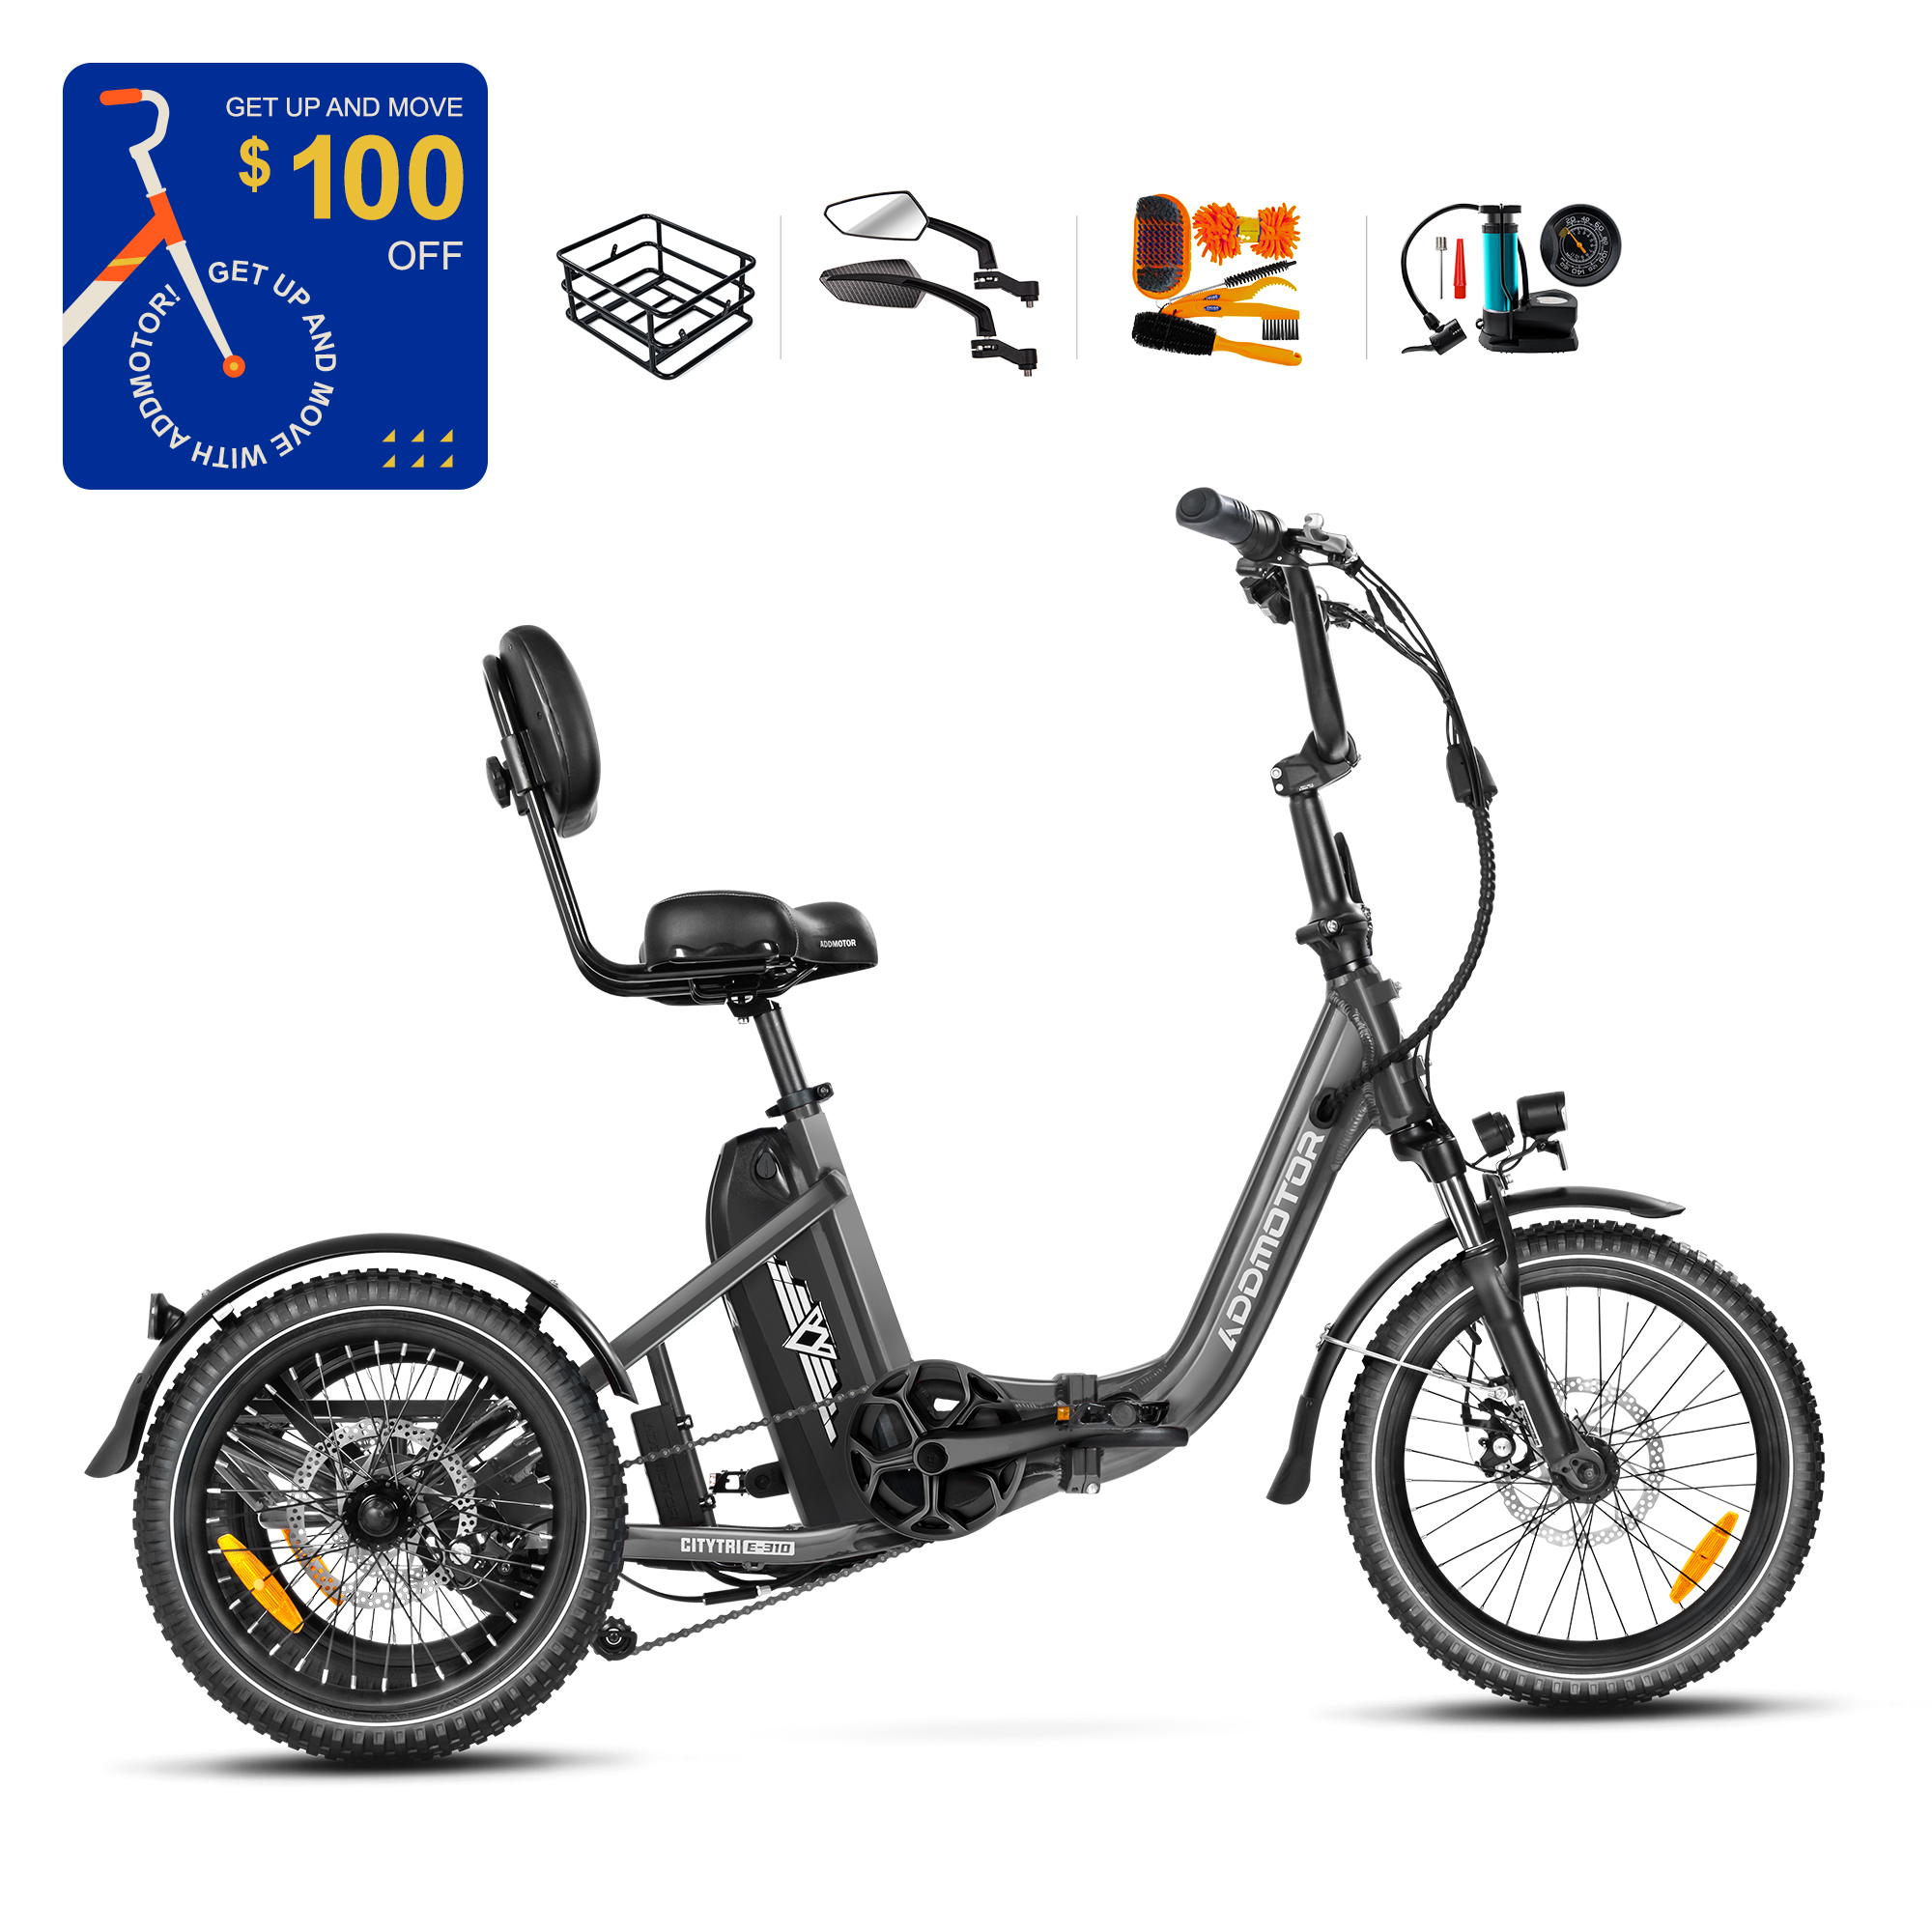 CITYTRI E-310 Mini Electric Trike with 4 gifts